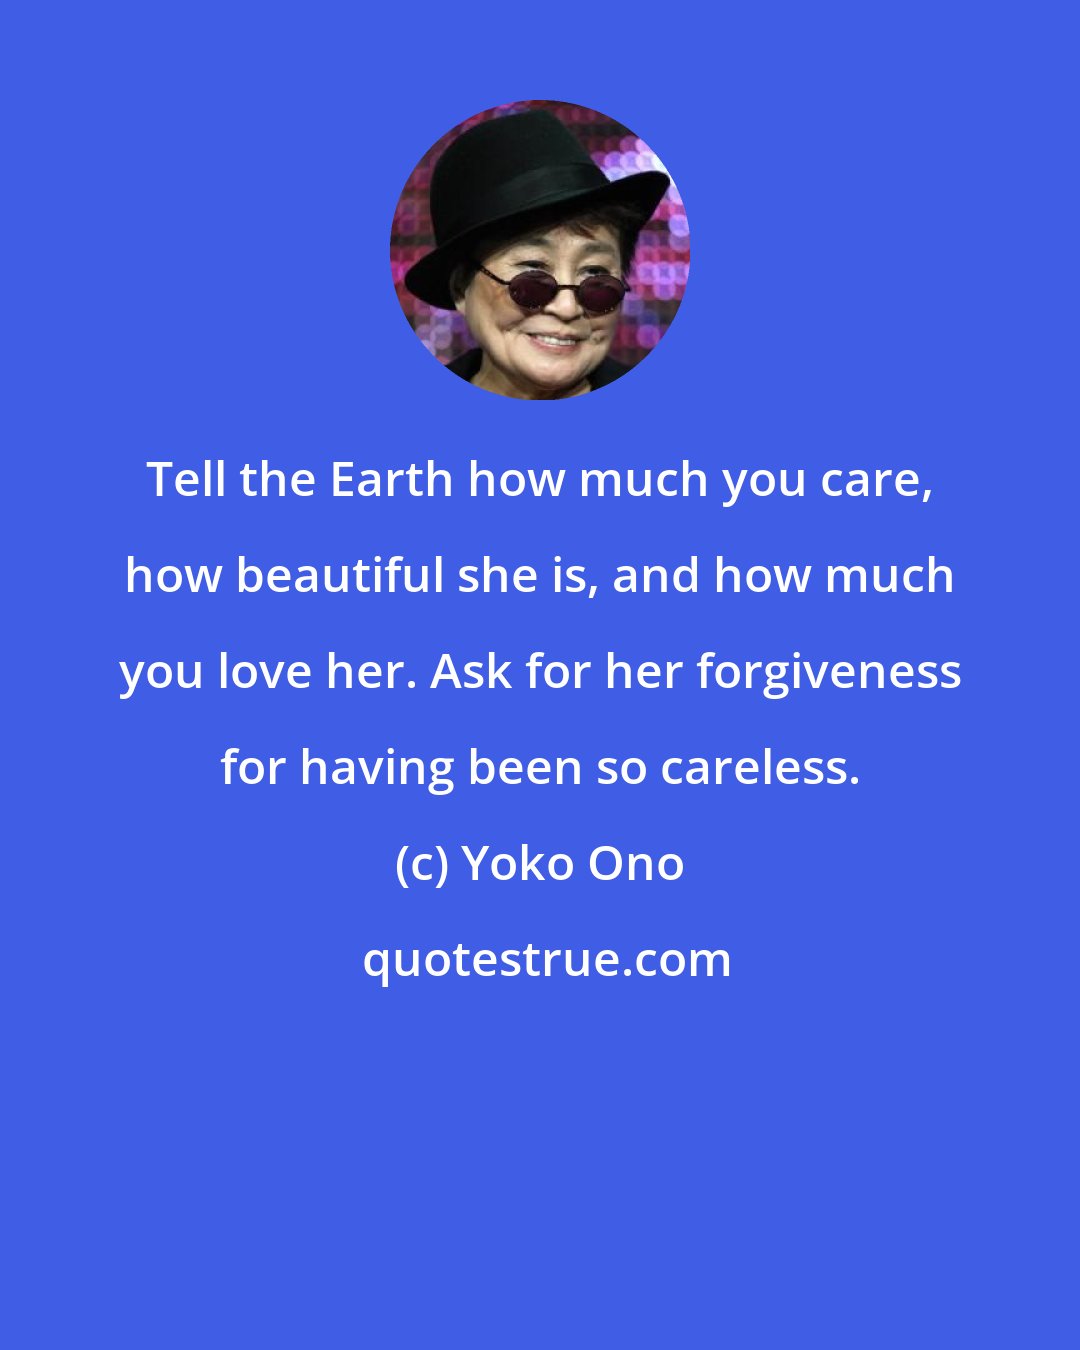 Yoko Ono: Tell the Earth how much you care, how beautiful she is, and how much you love her. Ask for her forgiveness for having been so careless.